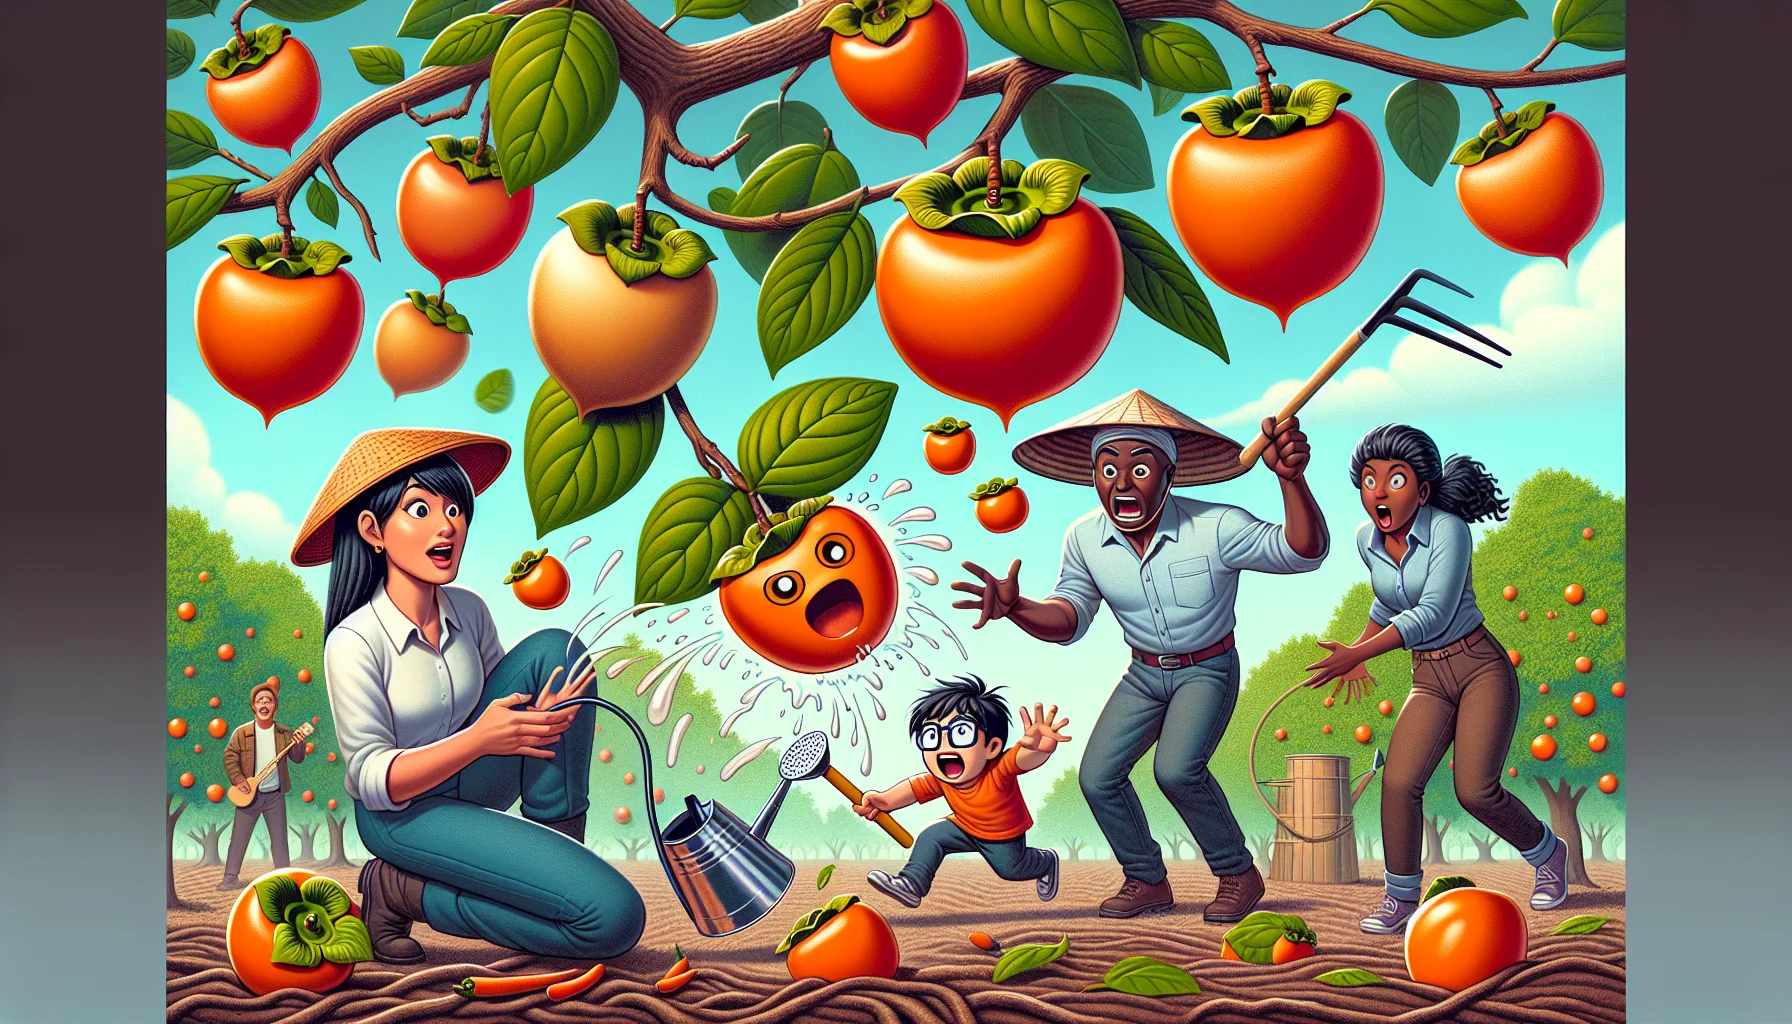 Produce a humorous yet realistic scene centered around gardening, featuring an array of persimmon types for the audience to explore. On one side, visualize a Hachiya persimmon tree with ripe fruit falling off and landing on a Caucasian male gardener's hat. In the middle, a Black female gardener is surprised as a Fuyu persimmon hits her watering can. On the other side, a Middle-Eastern child is happily catching a vibrant American persimmon. Encapsulate the joy of gardening with persimmons in a lighthearted and inviting illustration.